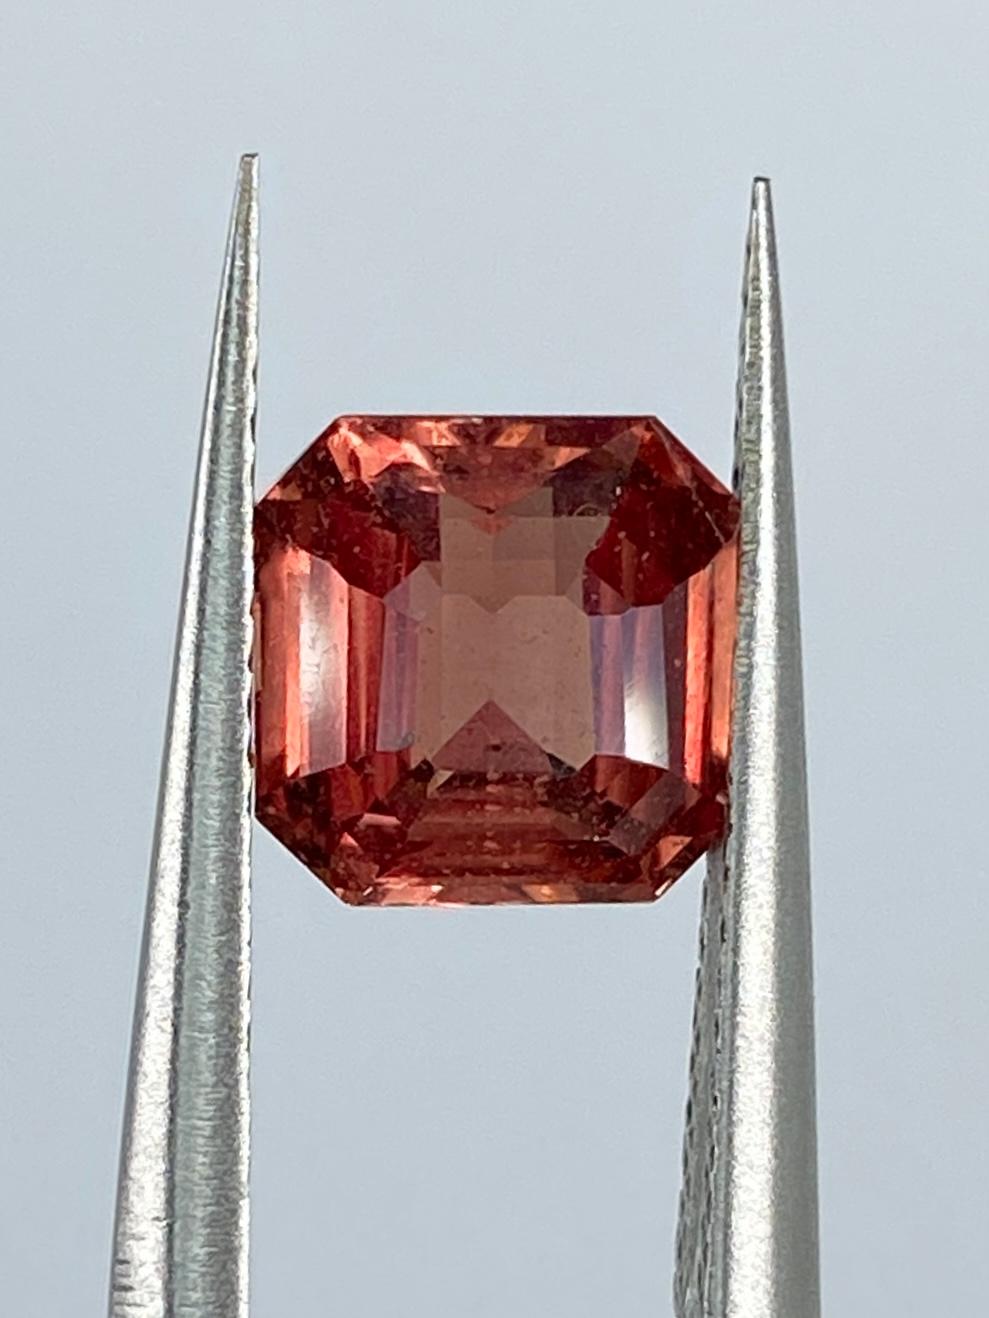 The Sapphire Merchant presents this rare treasure from the heart of Sri Lanka: our Natural Padparadscha Sapphire. Weighing 2.10 carats, this exquisite gem is an embodiment of timeless elegance. Its emerald shape, cut with precision into a step cut,